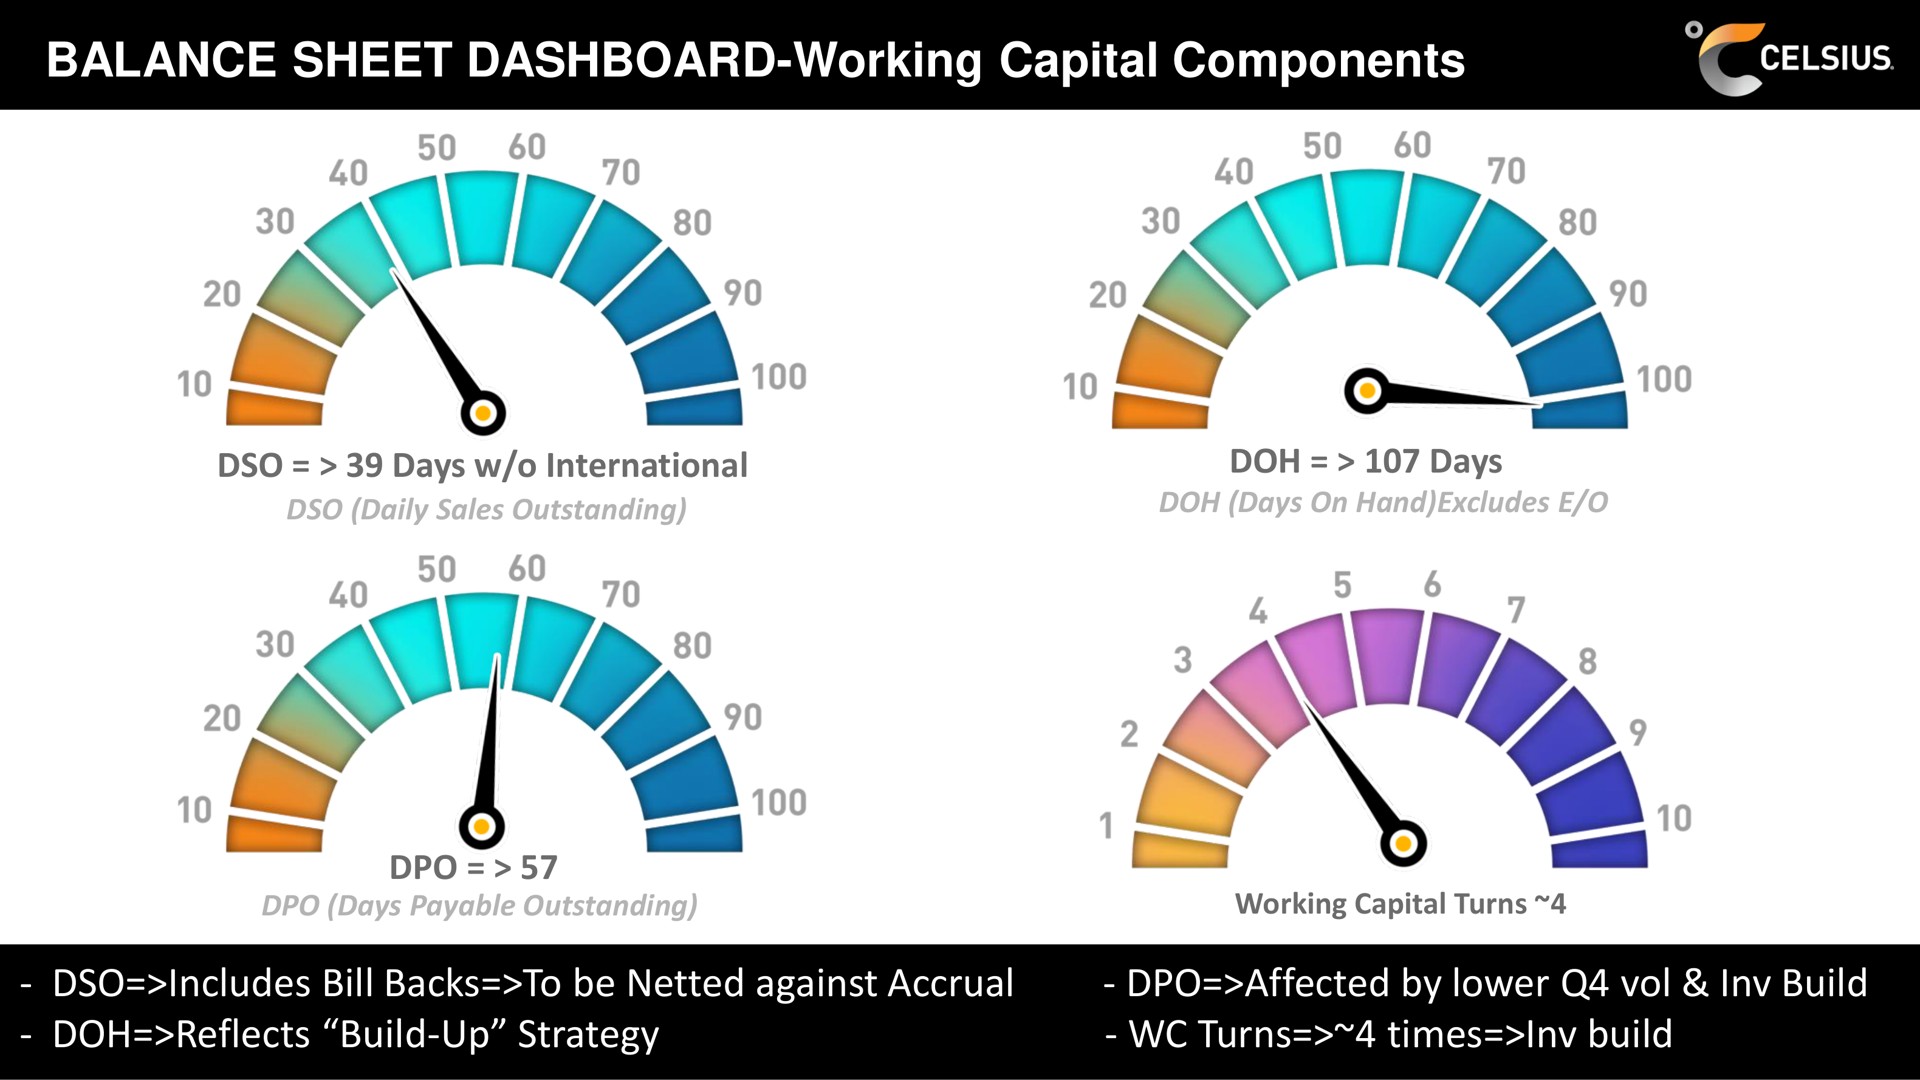 balance sheet dashboard working capital components days international days includes bill backs to be netted against accrual affected by lower vol build reflects build up strategy turns times build sup | Celsius Holdings